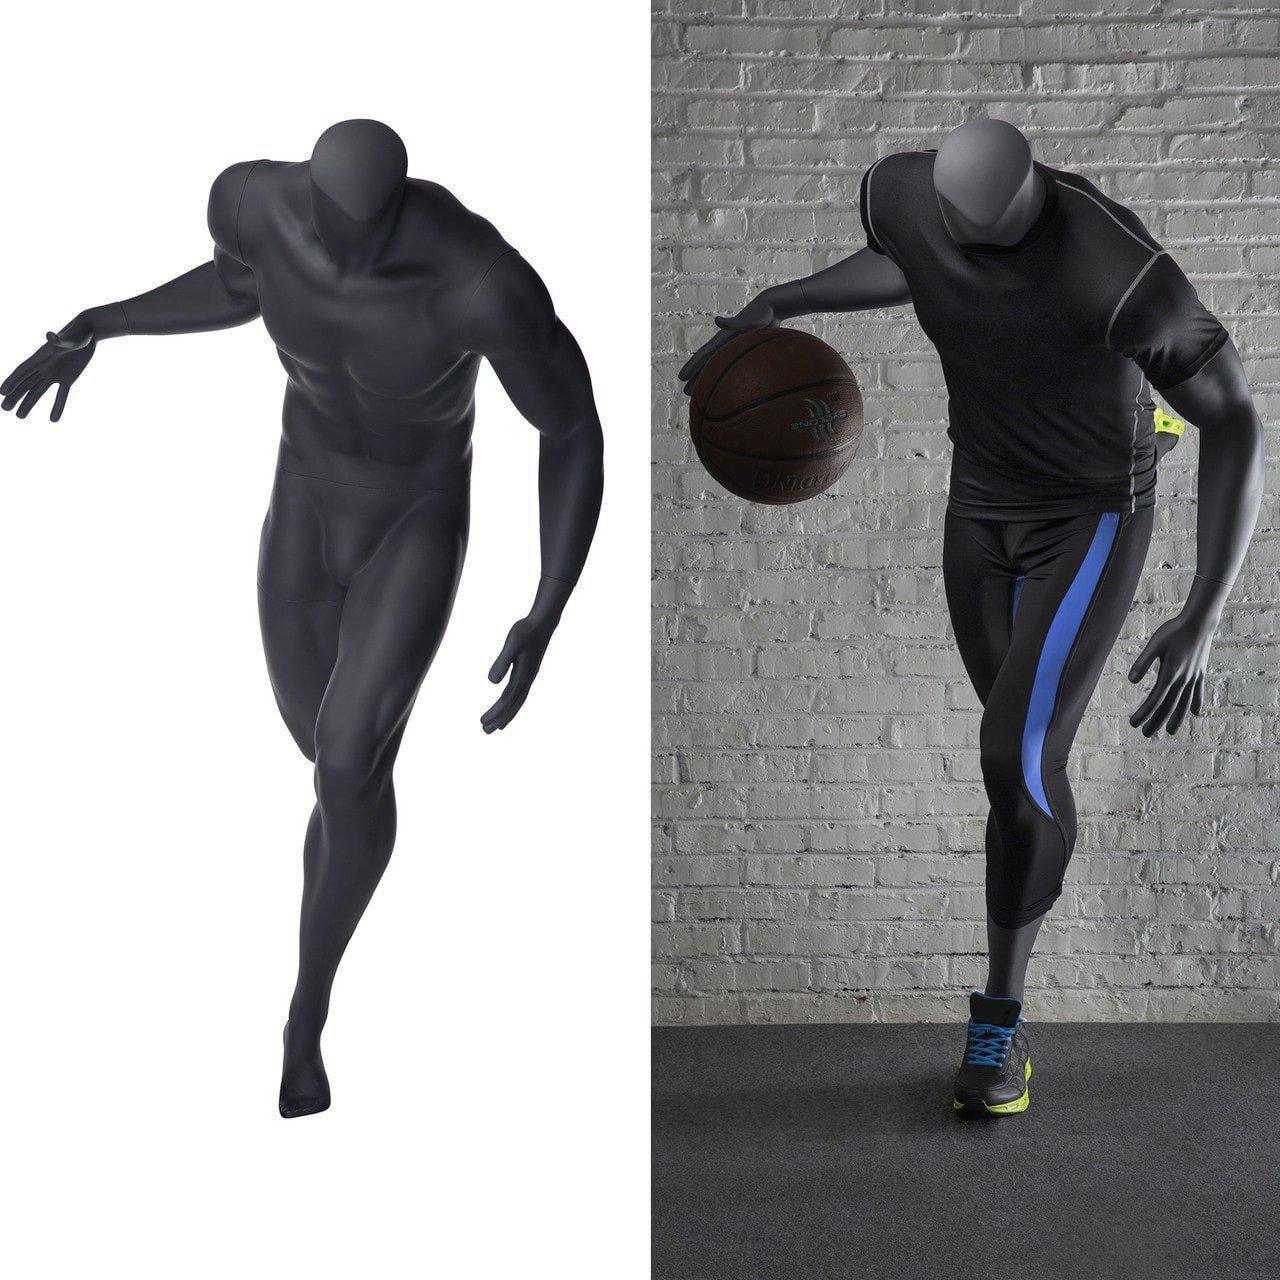 Athletic Headless Male Basketball Mannequin MM-NI3 - Mannequin Mall